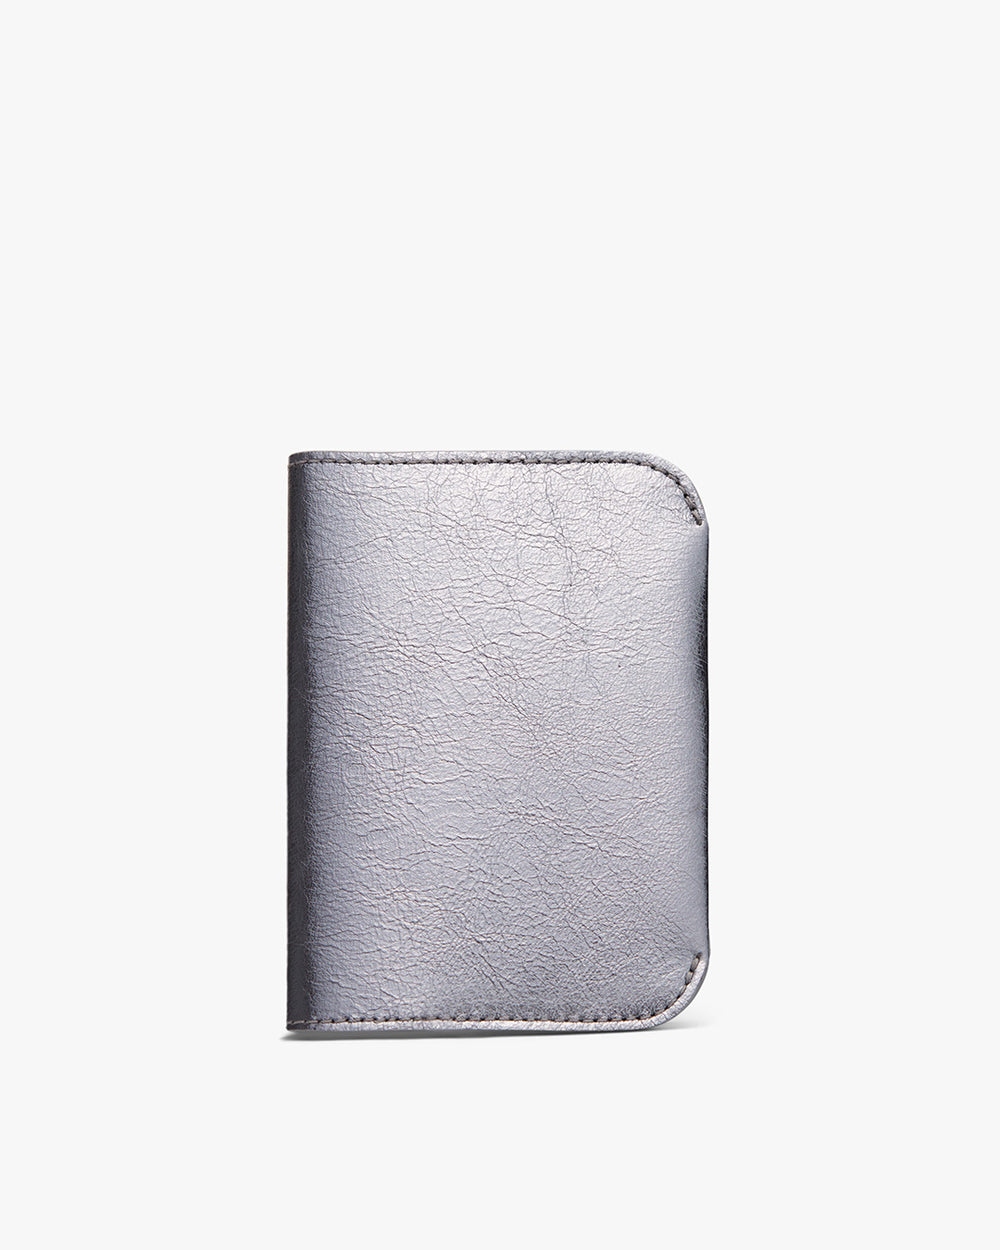 Leather wallet on a plain background.